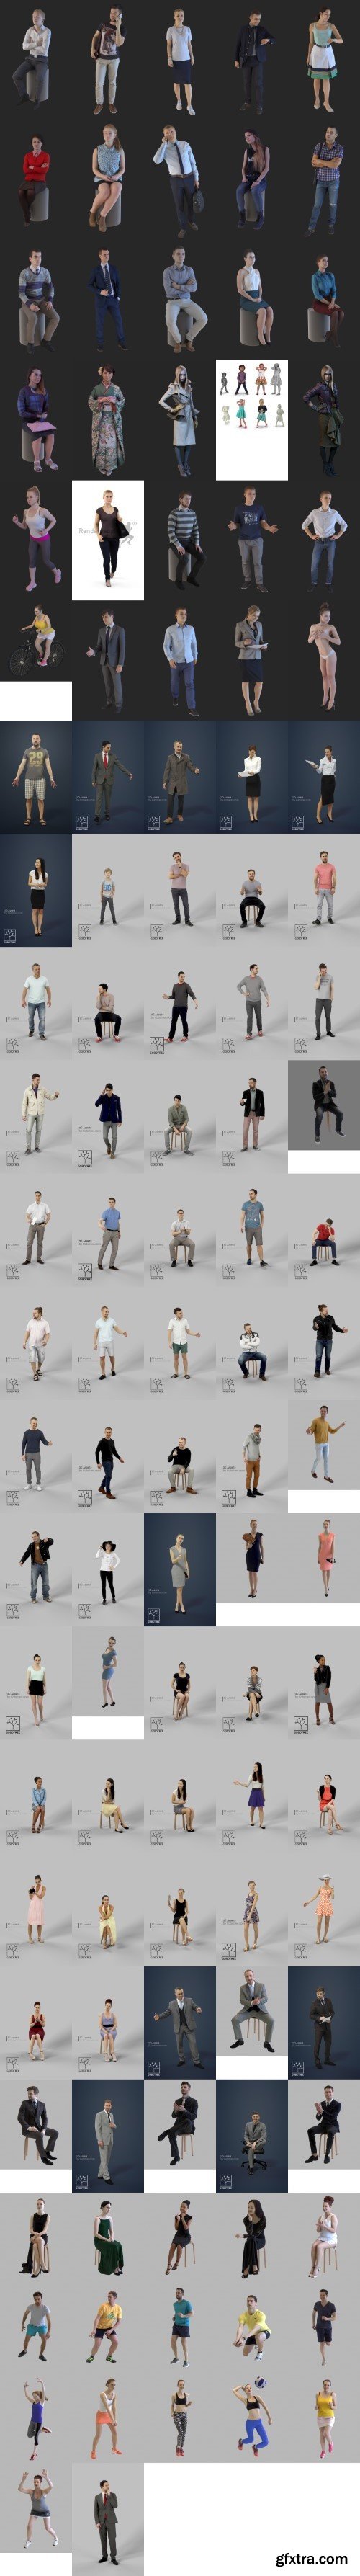 Human 3d Models Collection